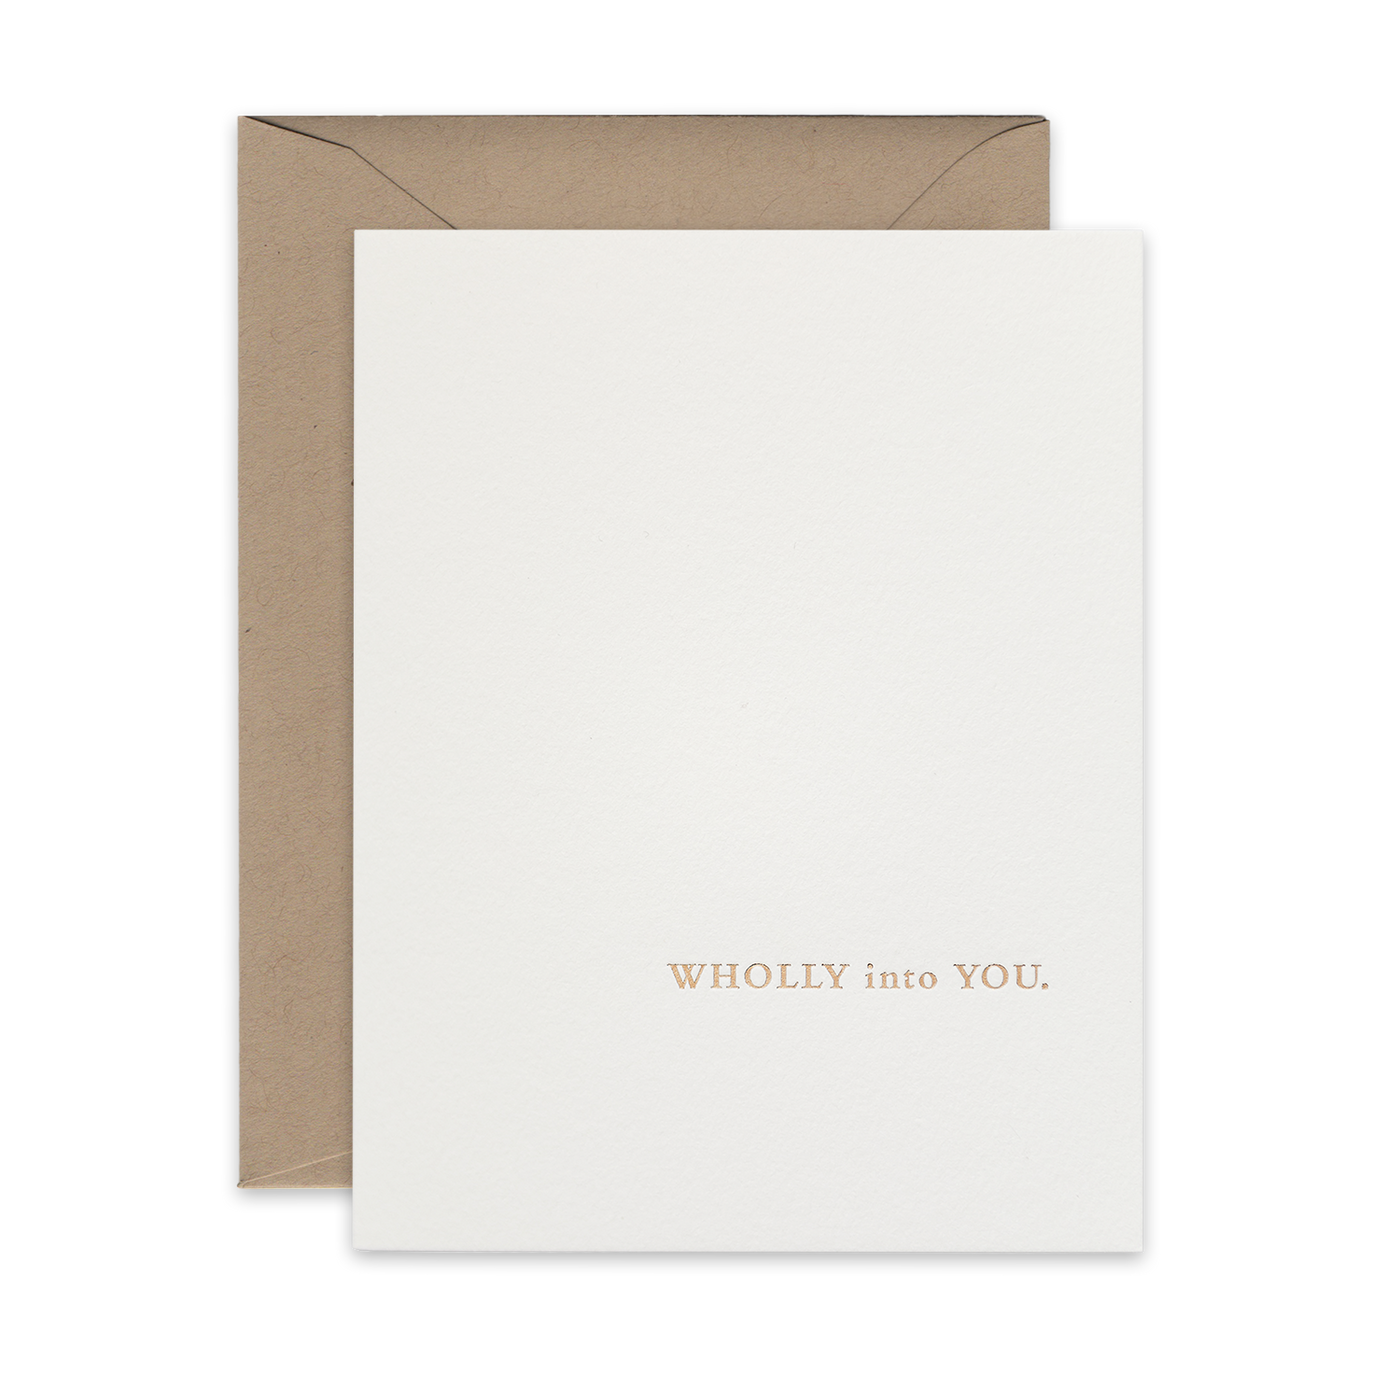 Gold foil letterpress greeting card by beknown. Wholly into you.